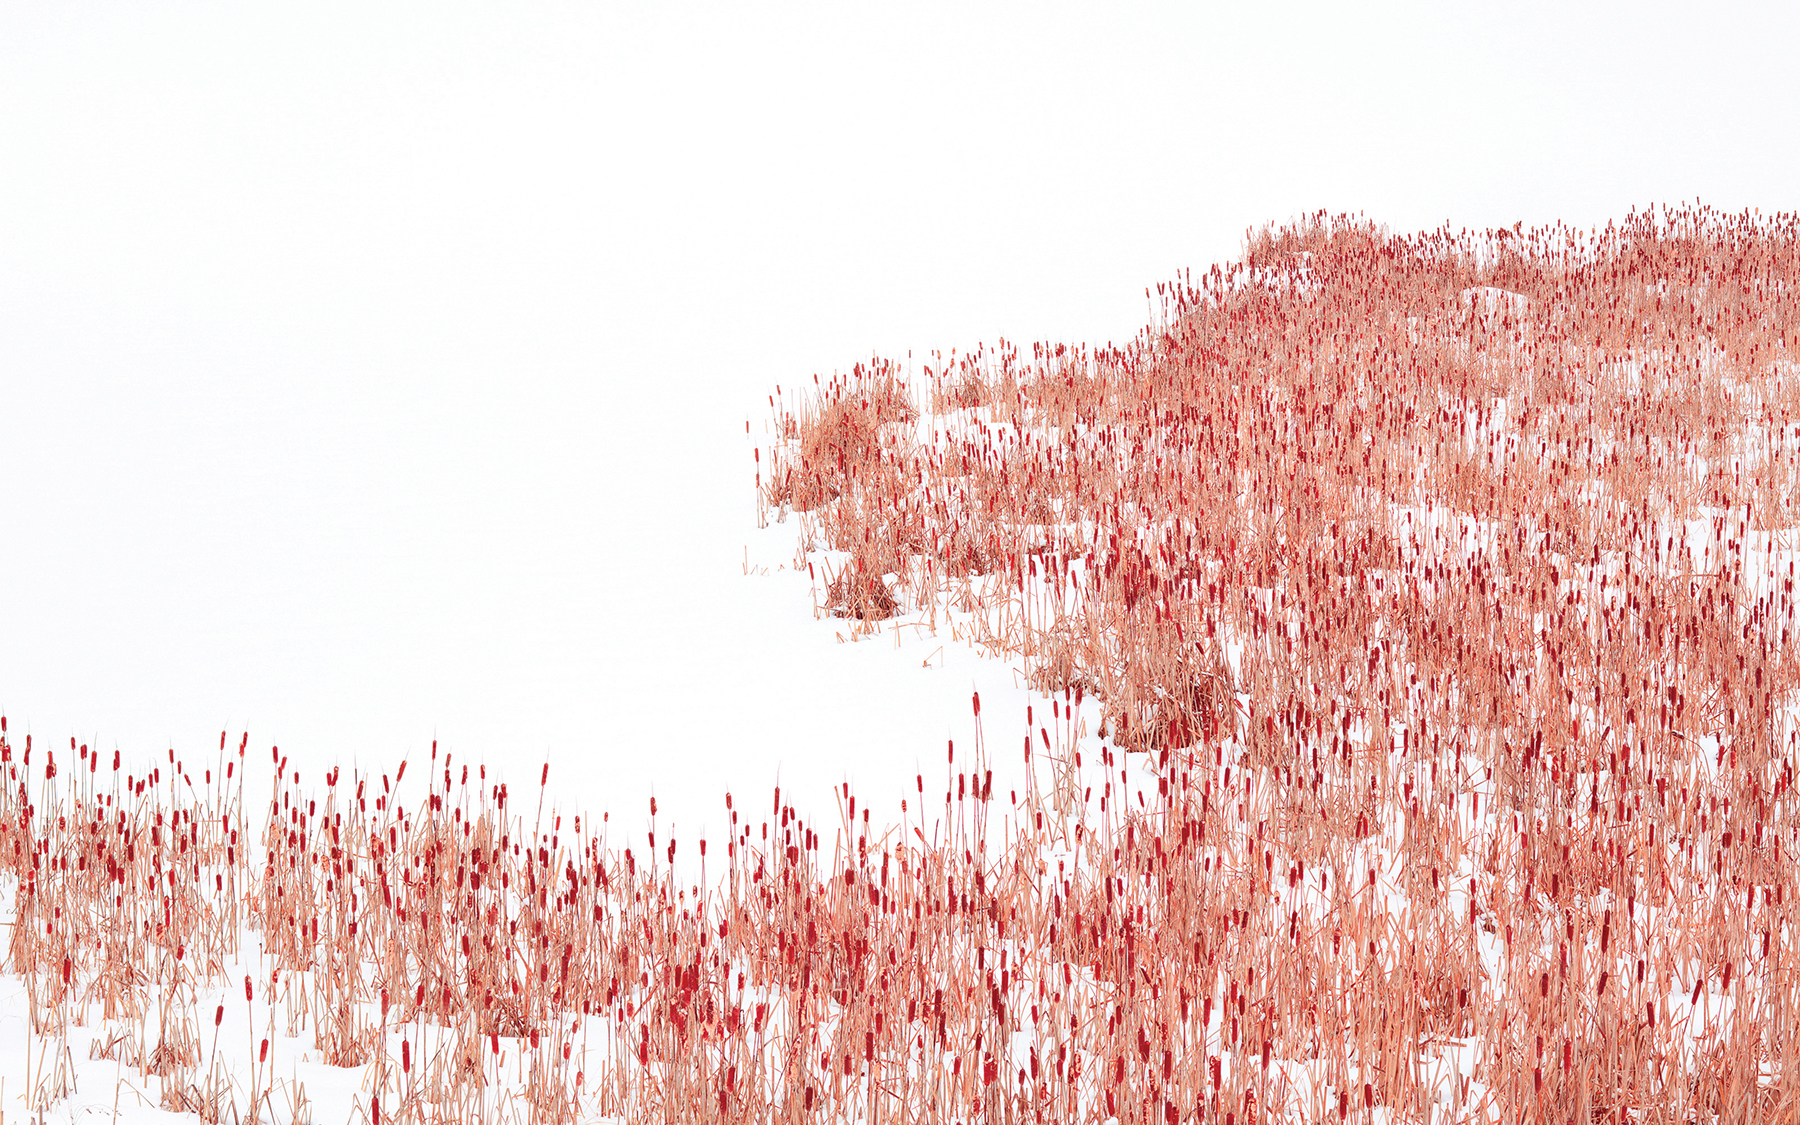 Dušek scours the Ontario countryside for subject matter. Below is his photograph, Cattails in Red.